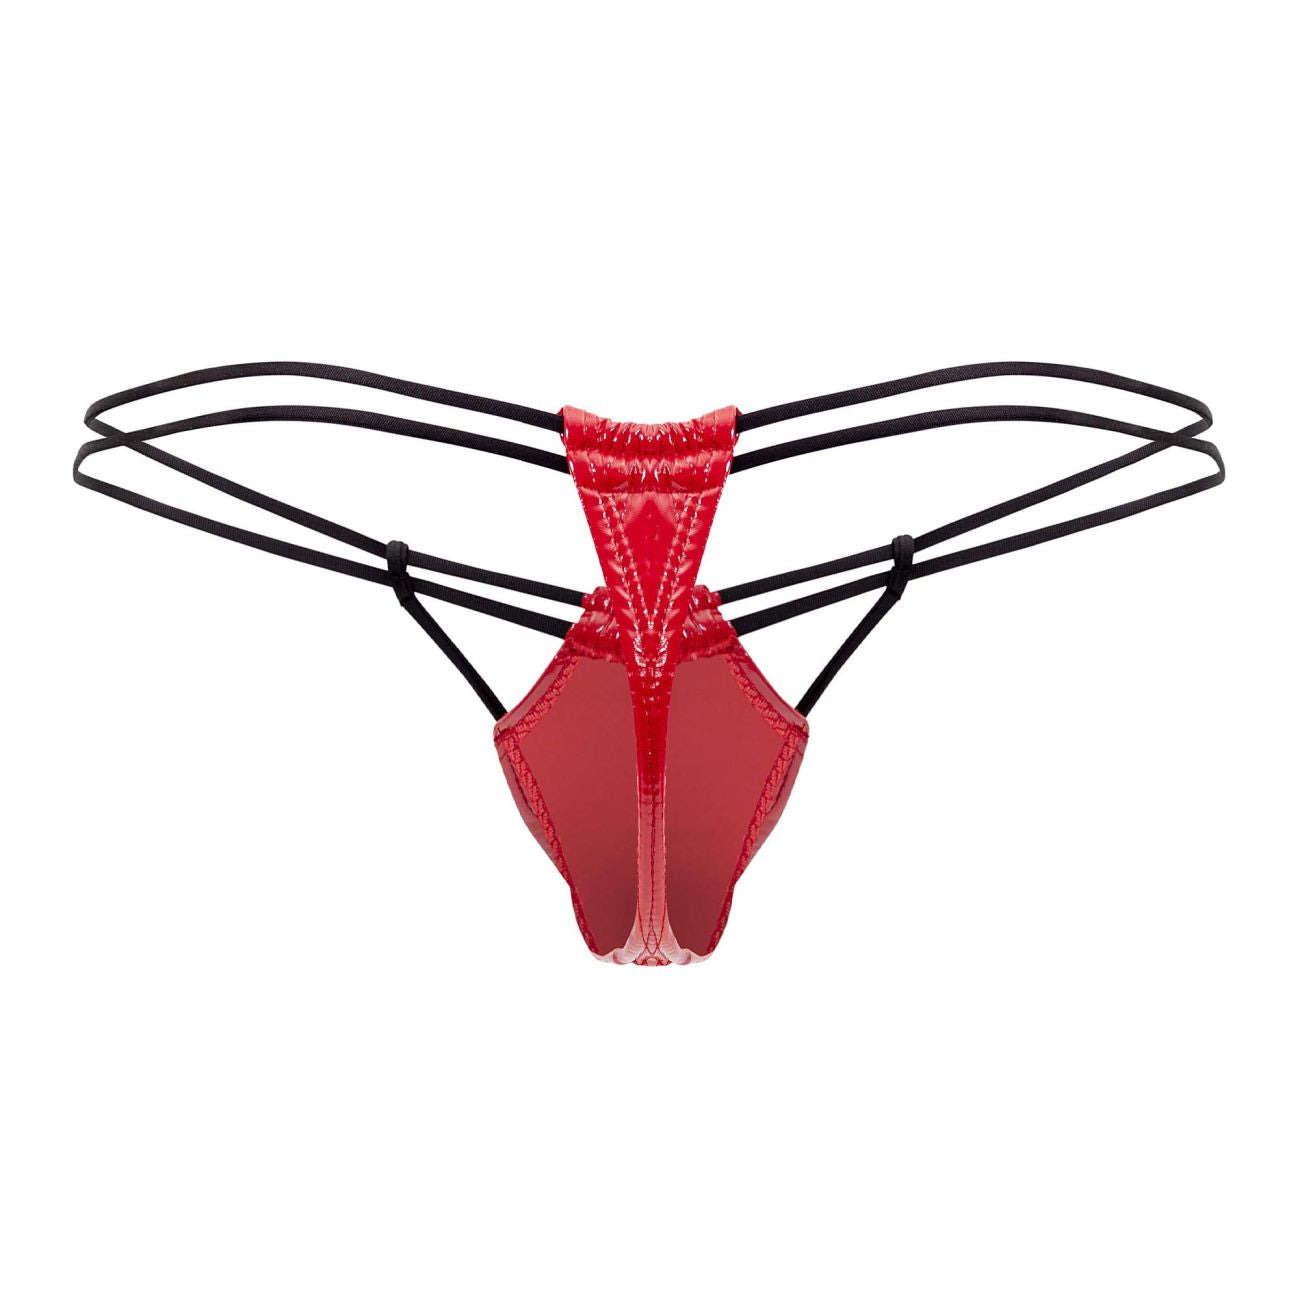 CandyMan 99685 Lace Thongs Color Red